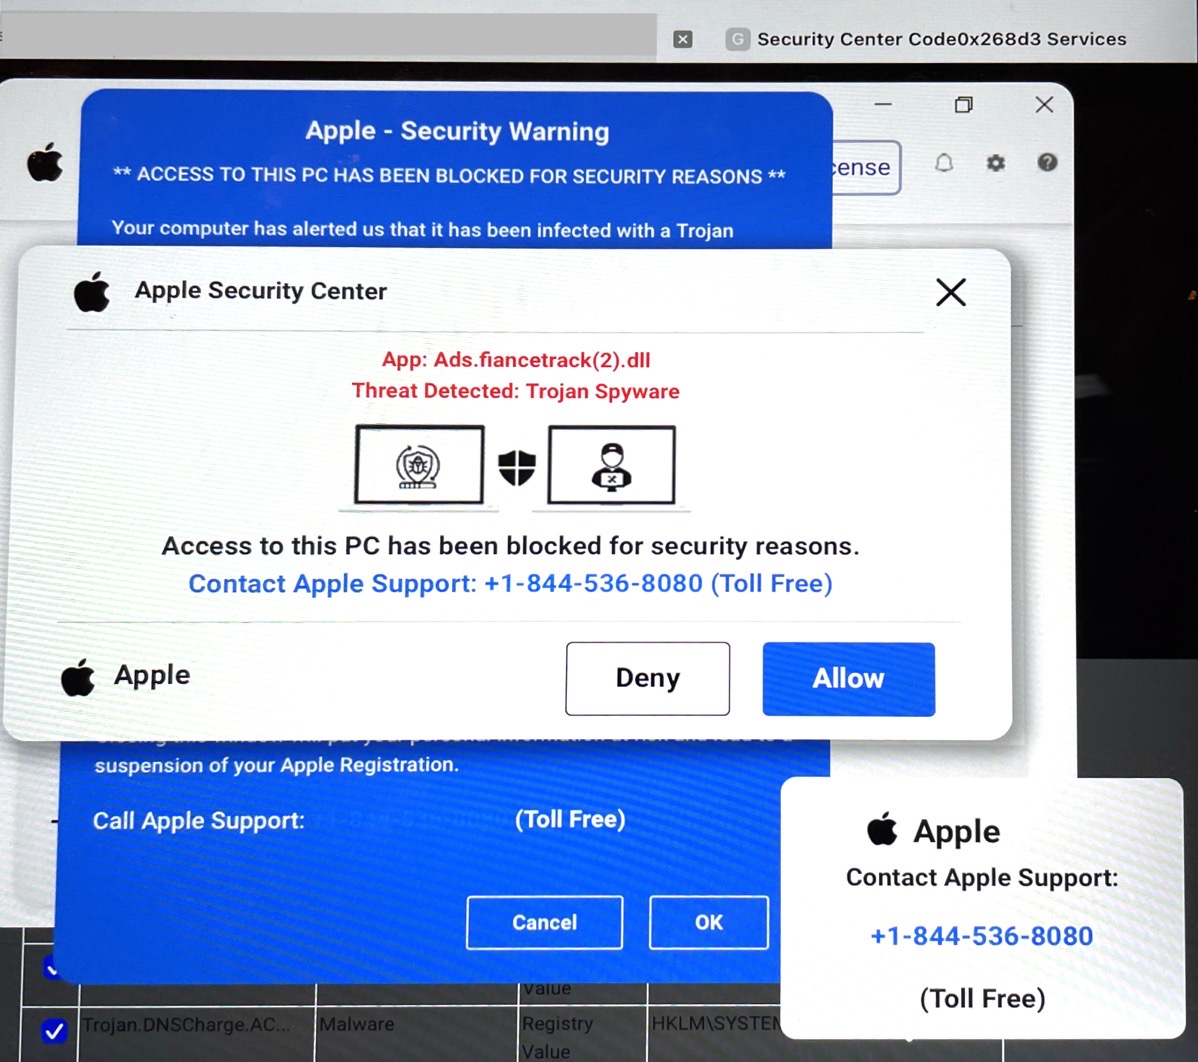 Page says Apple Security Center with a phone number. Has overlapping windows (first hint) and x's in the corner to close them and apple supposedly saying this 